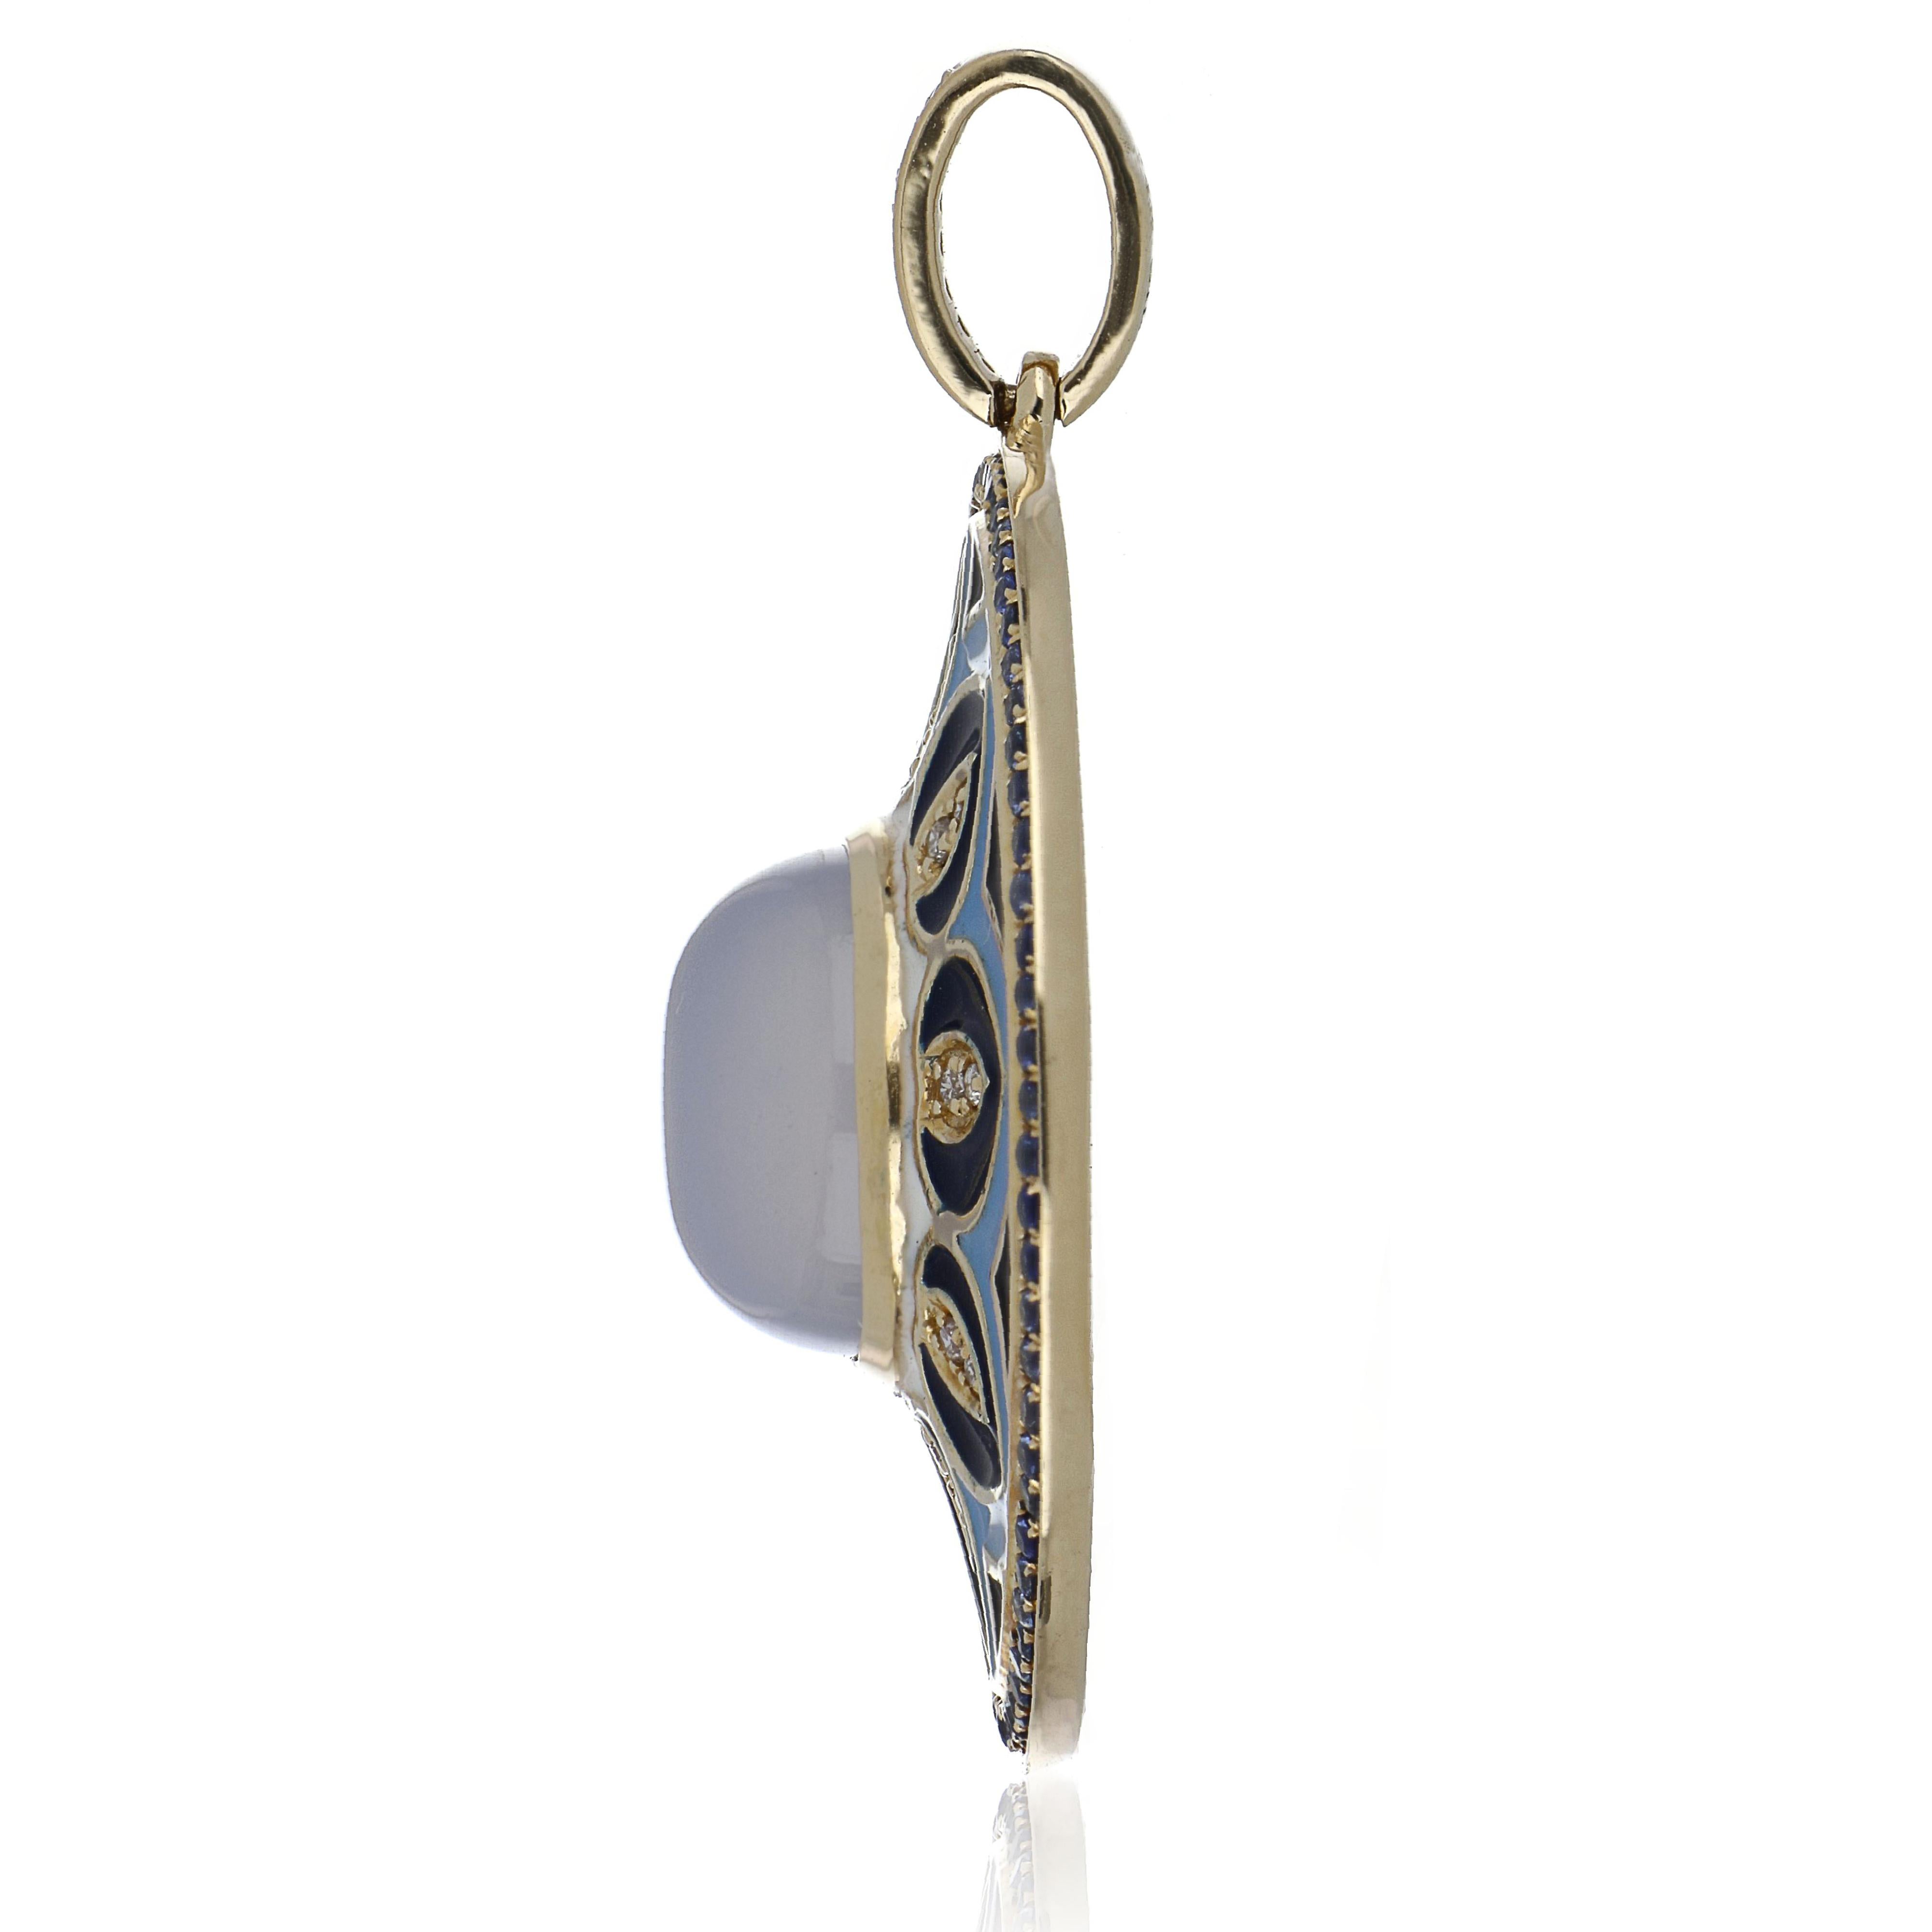 Elegant and exquisite Enamel Cocktail 14 K Pendant, center set with 4.10 Cts. Cabochon Cut Blue Chalcedony Round . Surrounded with Blue Sapphire Rounds 0.45 Cts. accented with Diamonds, weighing approx. 0.09 Cts. Beautifully Hand crafted in 14 Karat